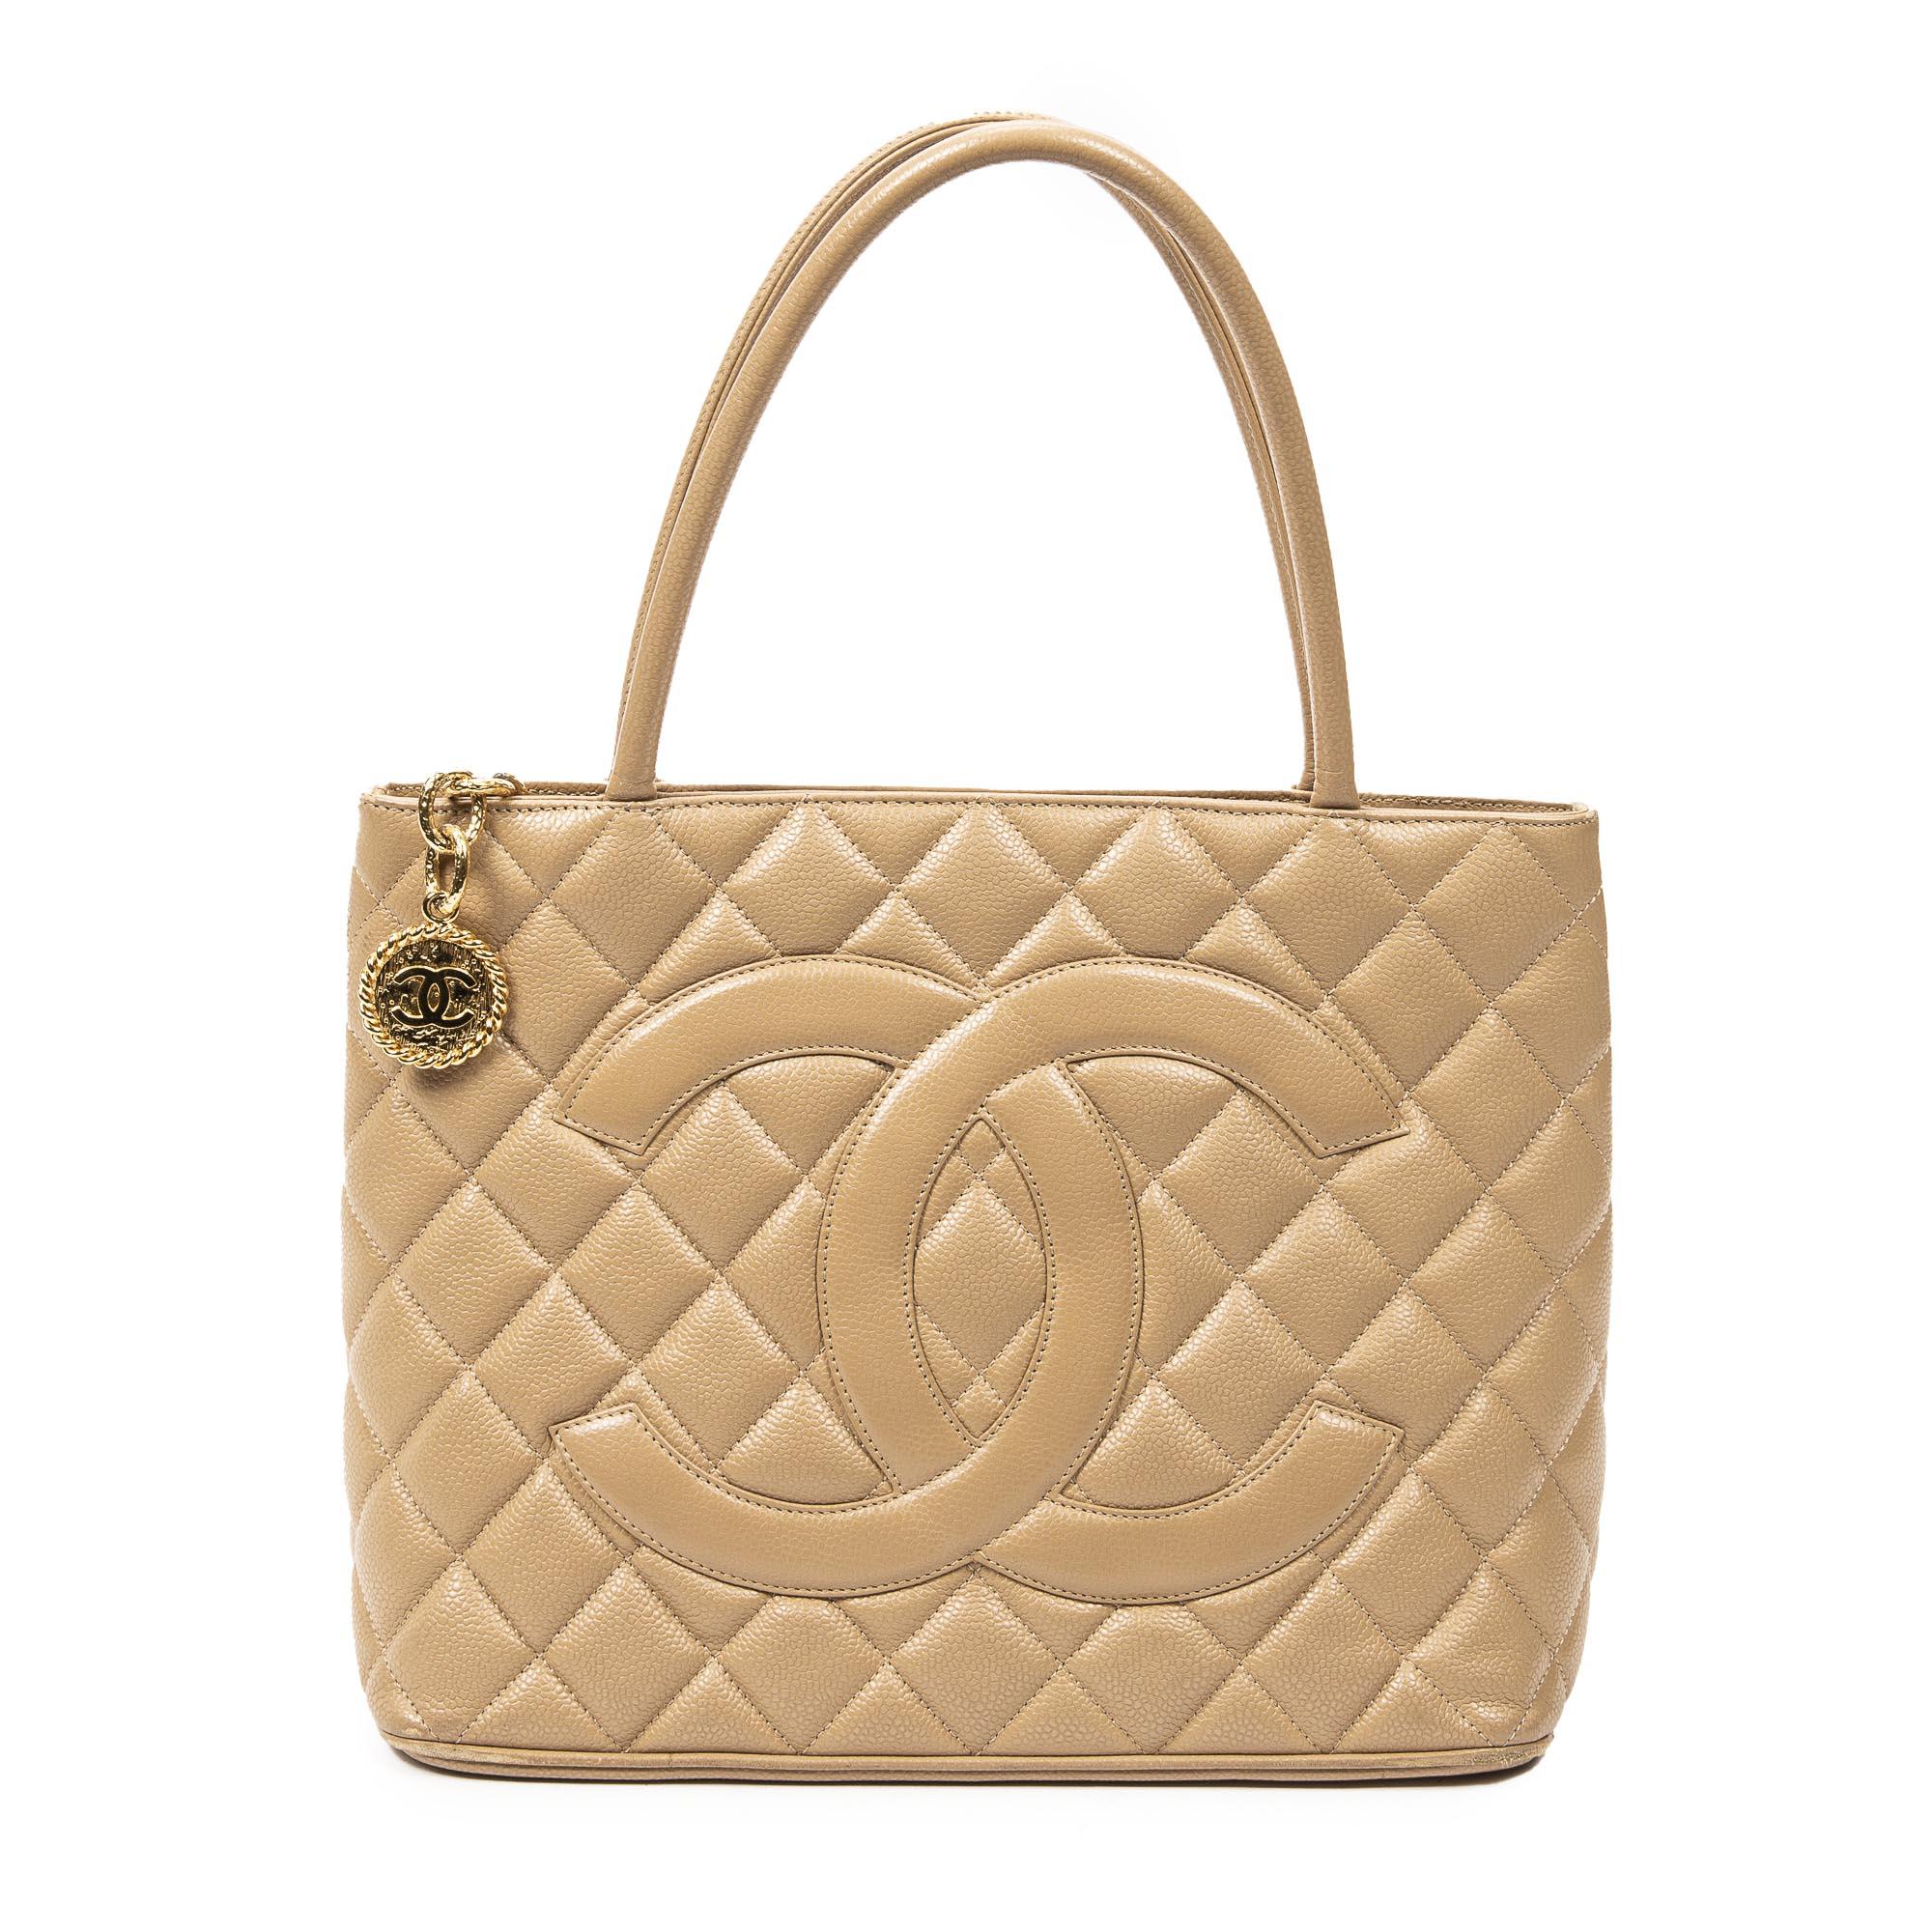 CHANEL 2006 CC Medallion Tote Bag Cream Beige Caviar Leather First